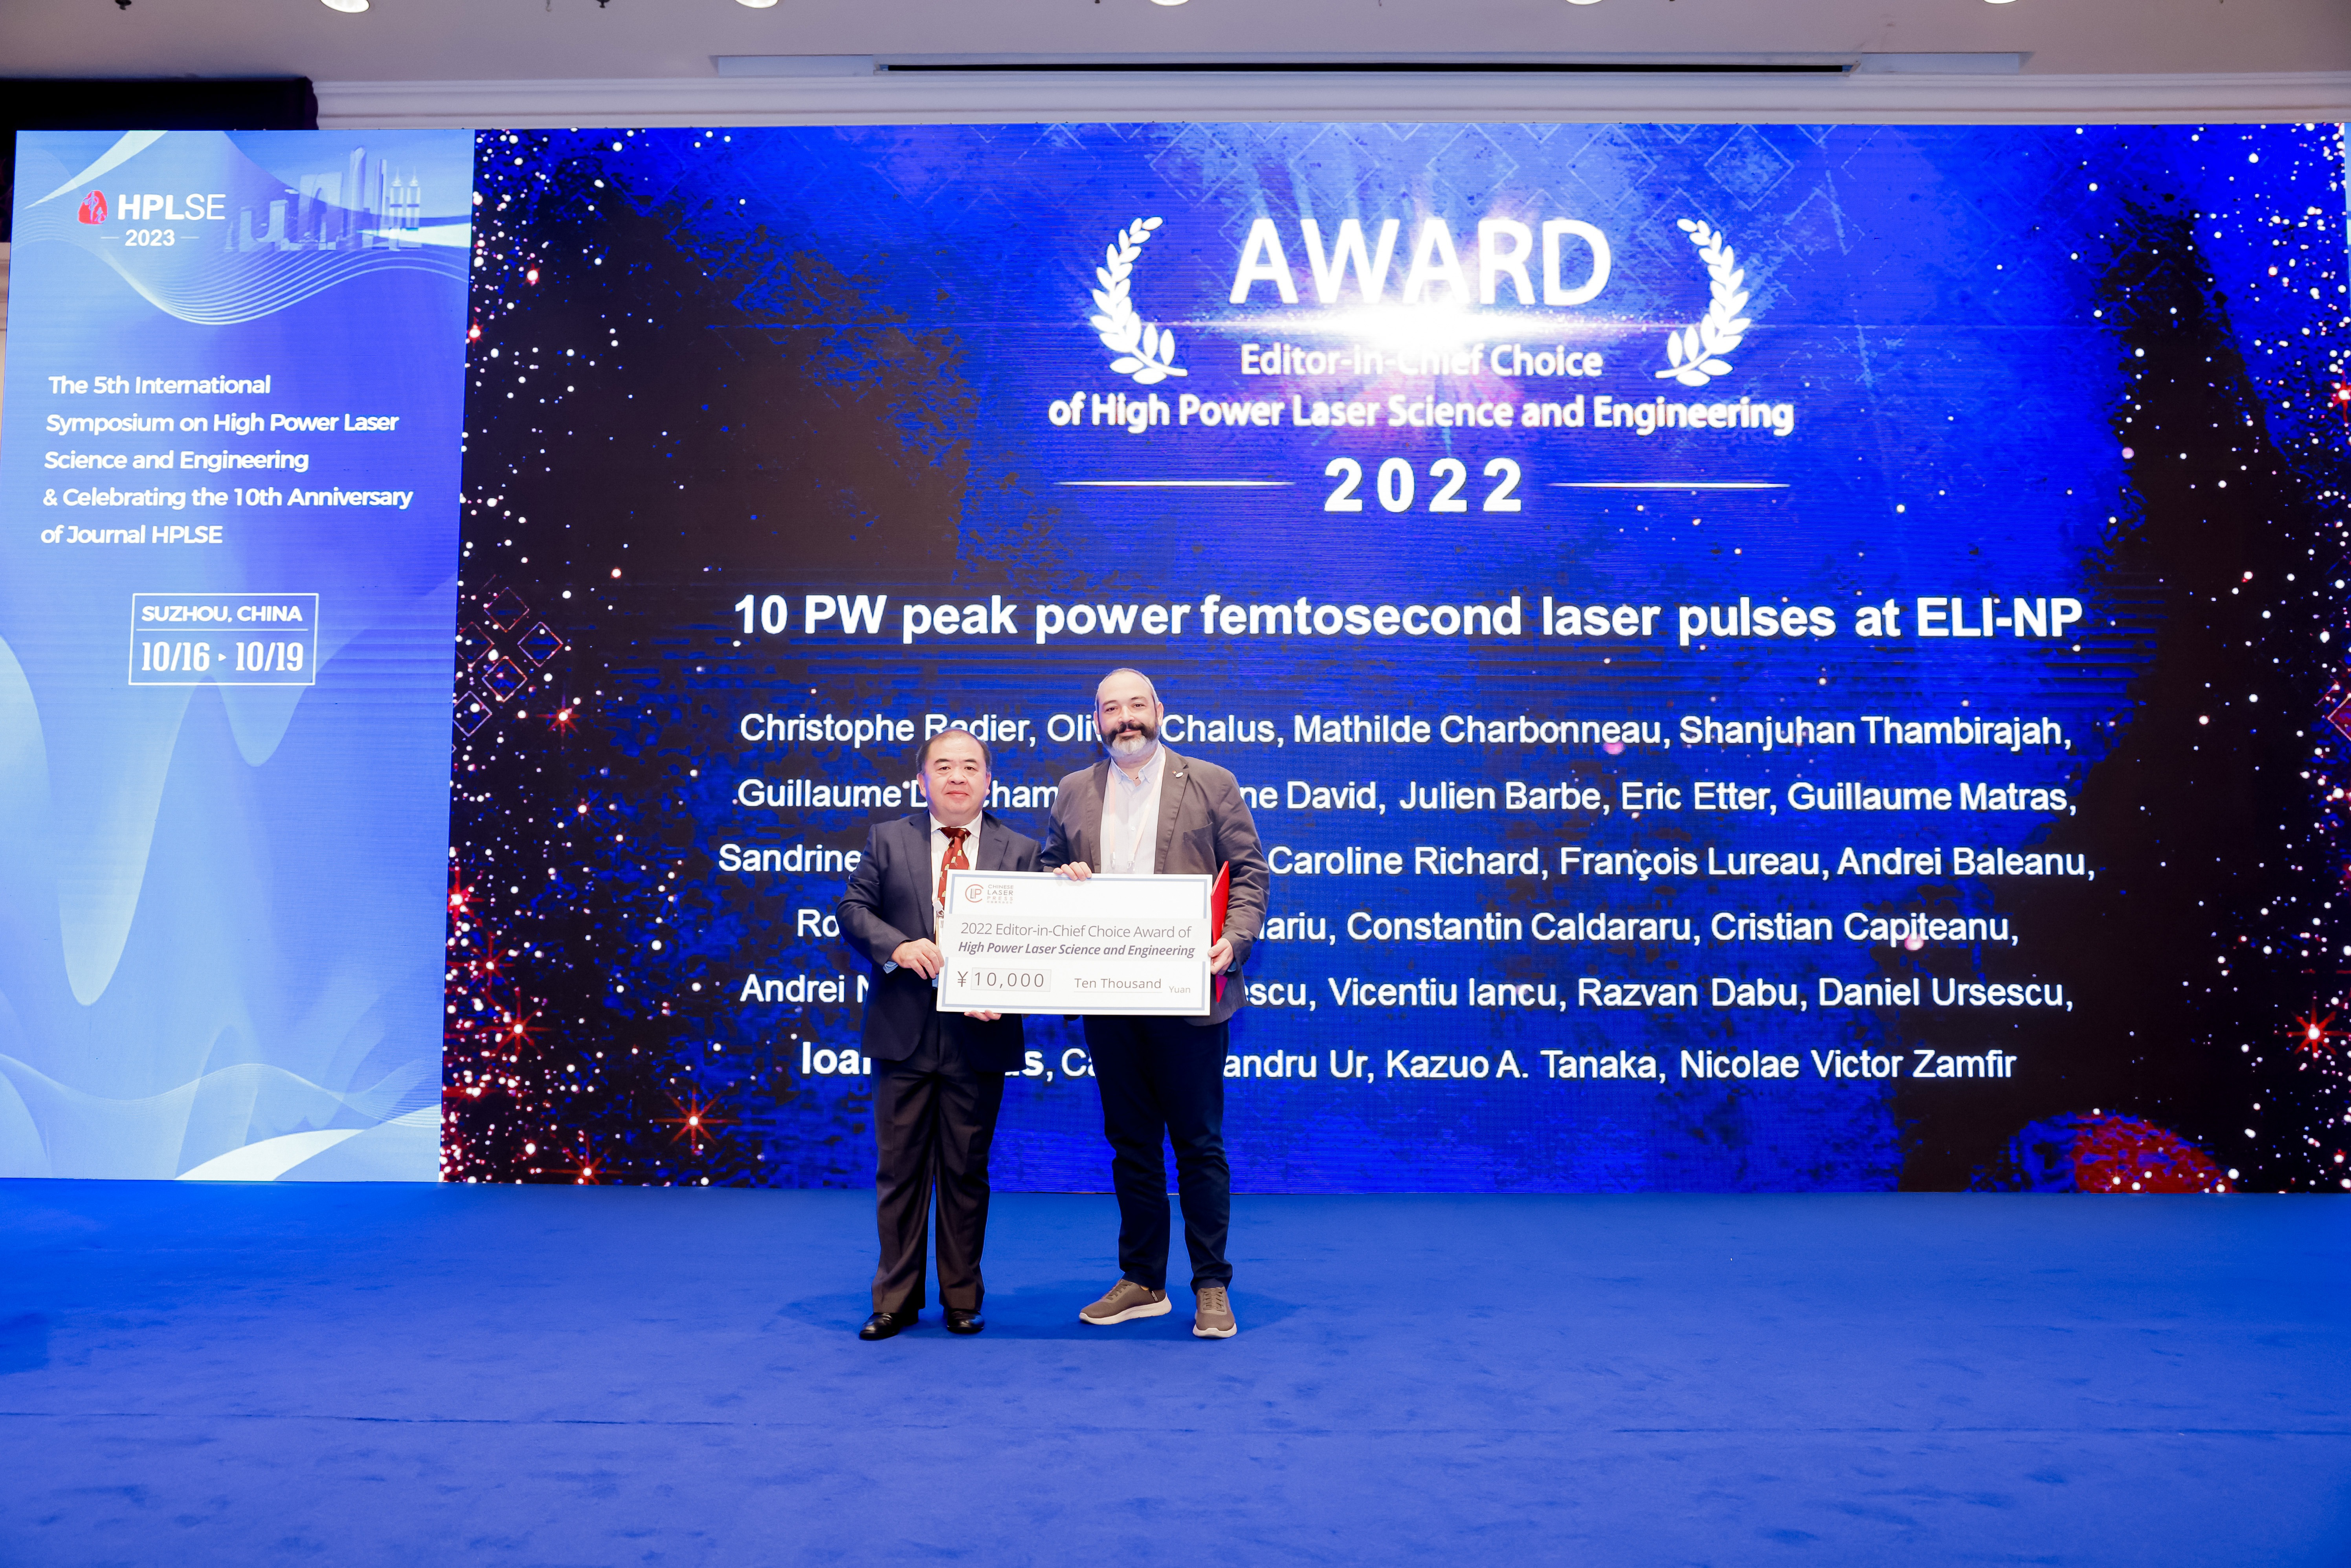 Photograph taken at the HPLSE2023 Symposium in Suzhou, China. Prof Jianqiang Zhu is (left) presenting the award to Prof Ioan Dancus (right).